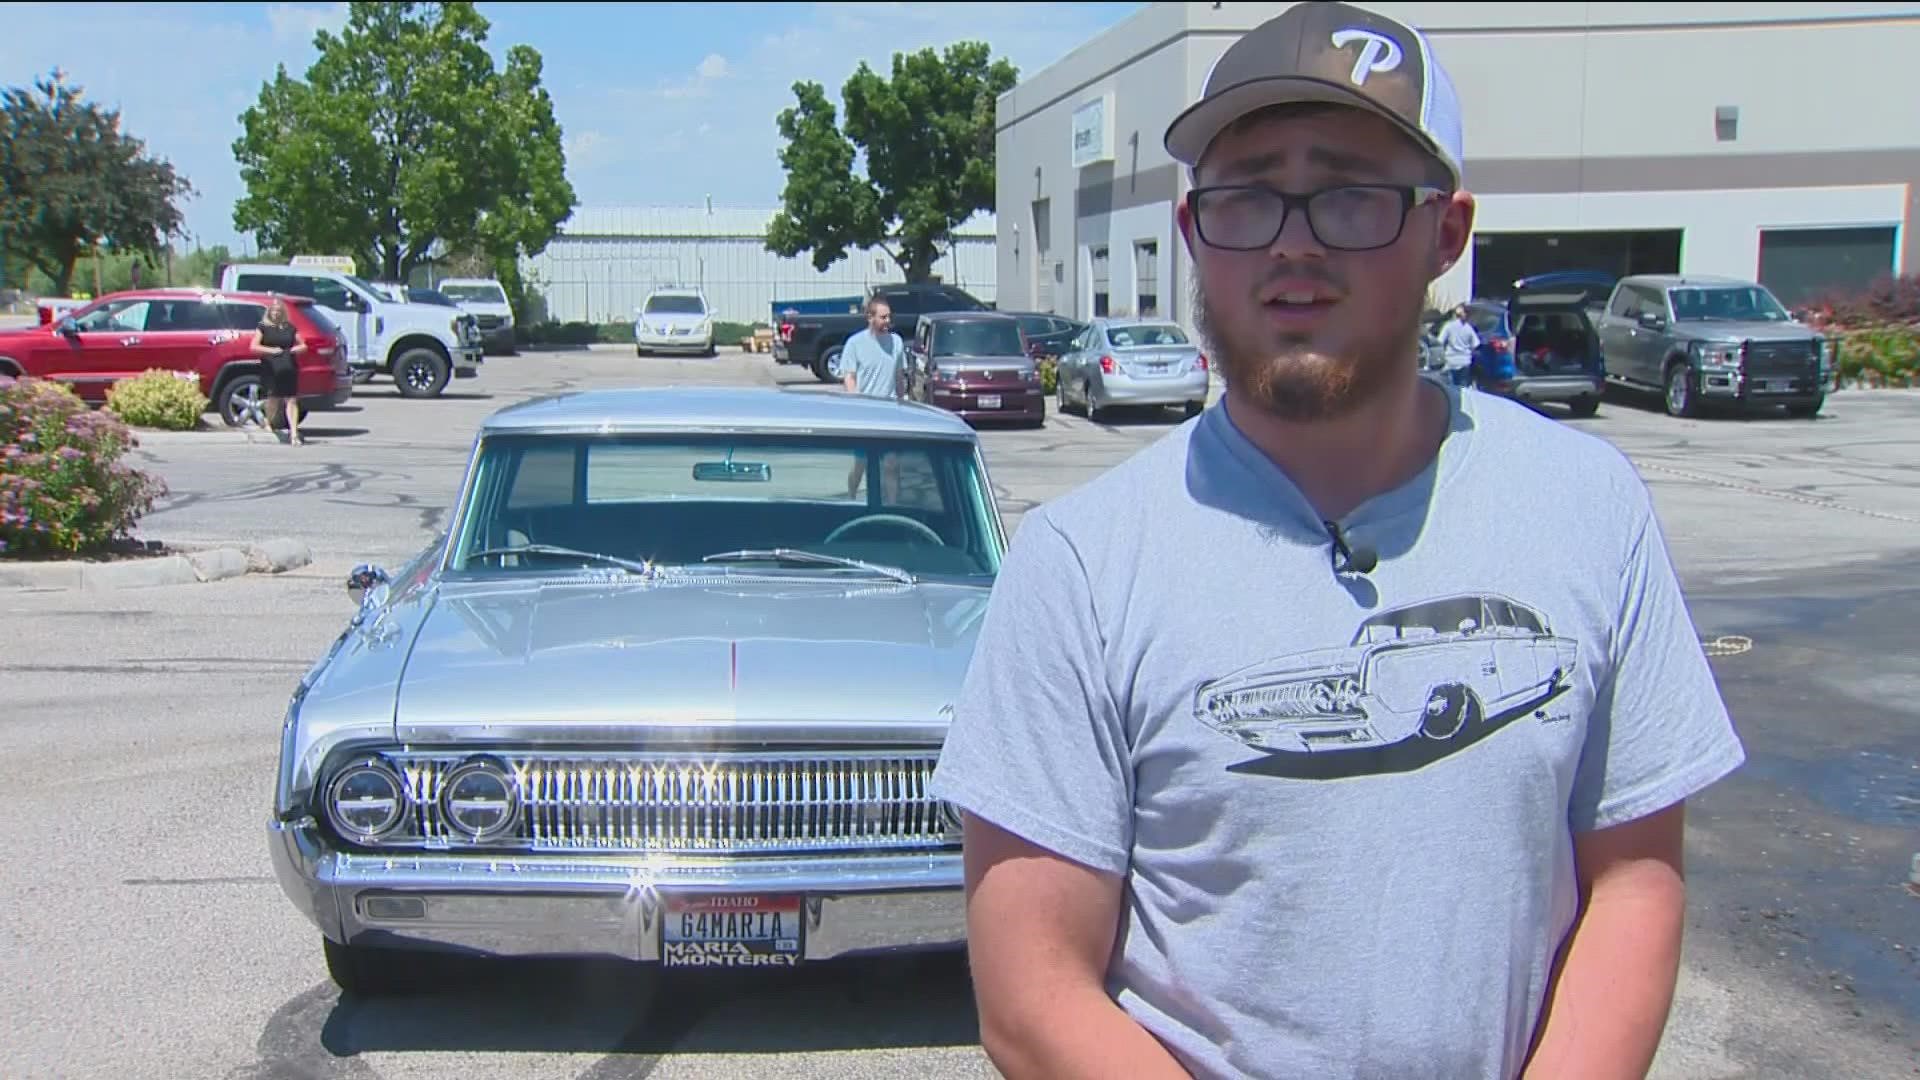 Cole Medcoff bought the old classic car after he was diagnosed with a brain tumor. It was a lot more work than he bargained for. The community stepped in to help.